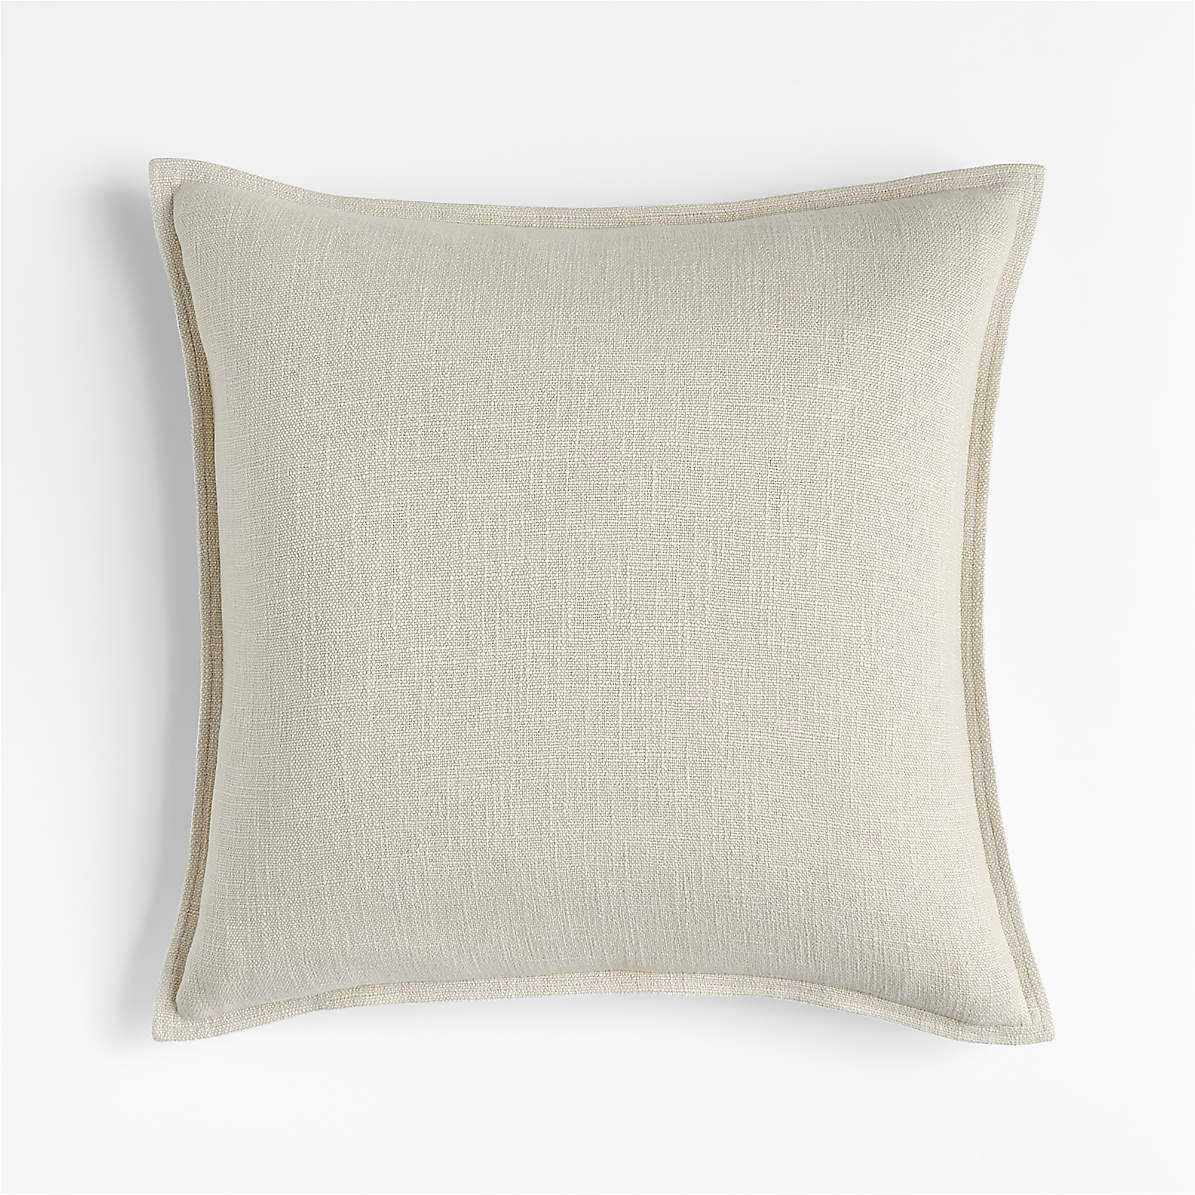 20 x 20 Amity Home Ruched Pillow Ivory